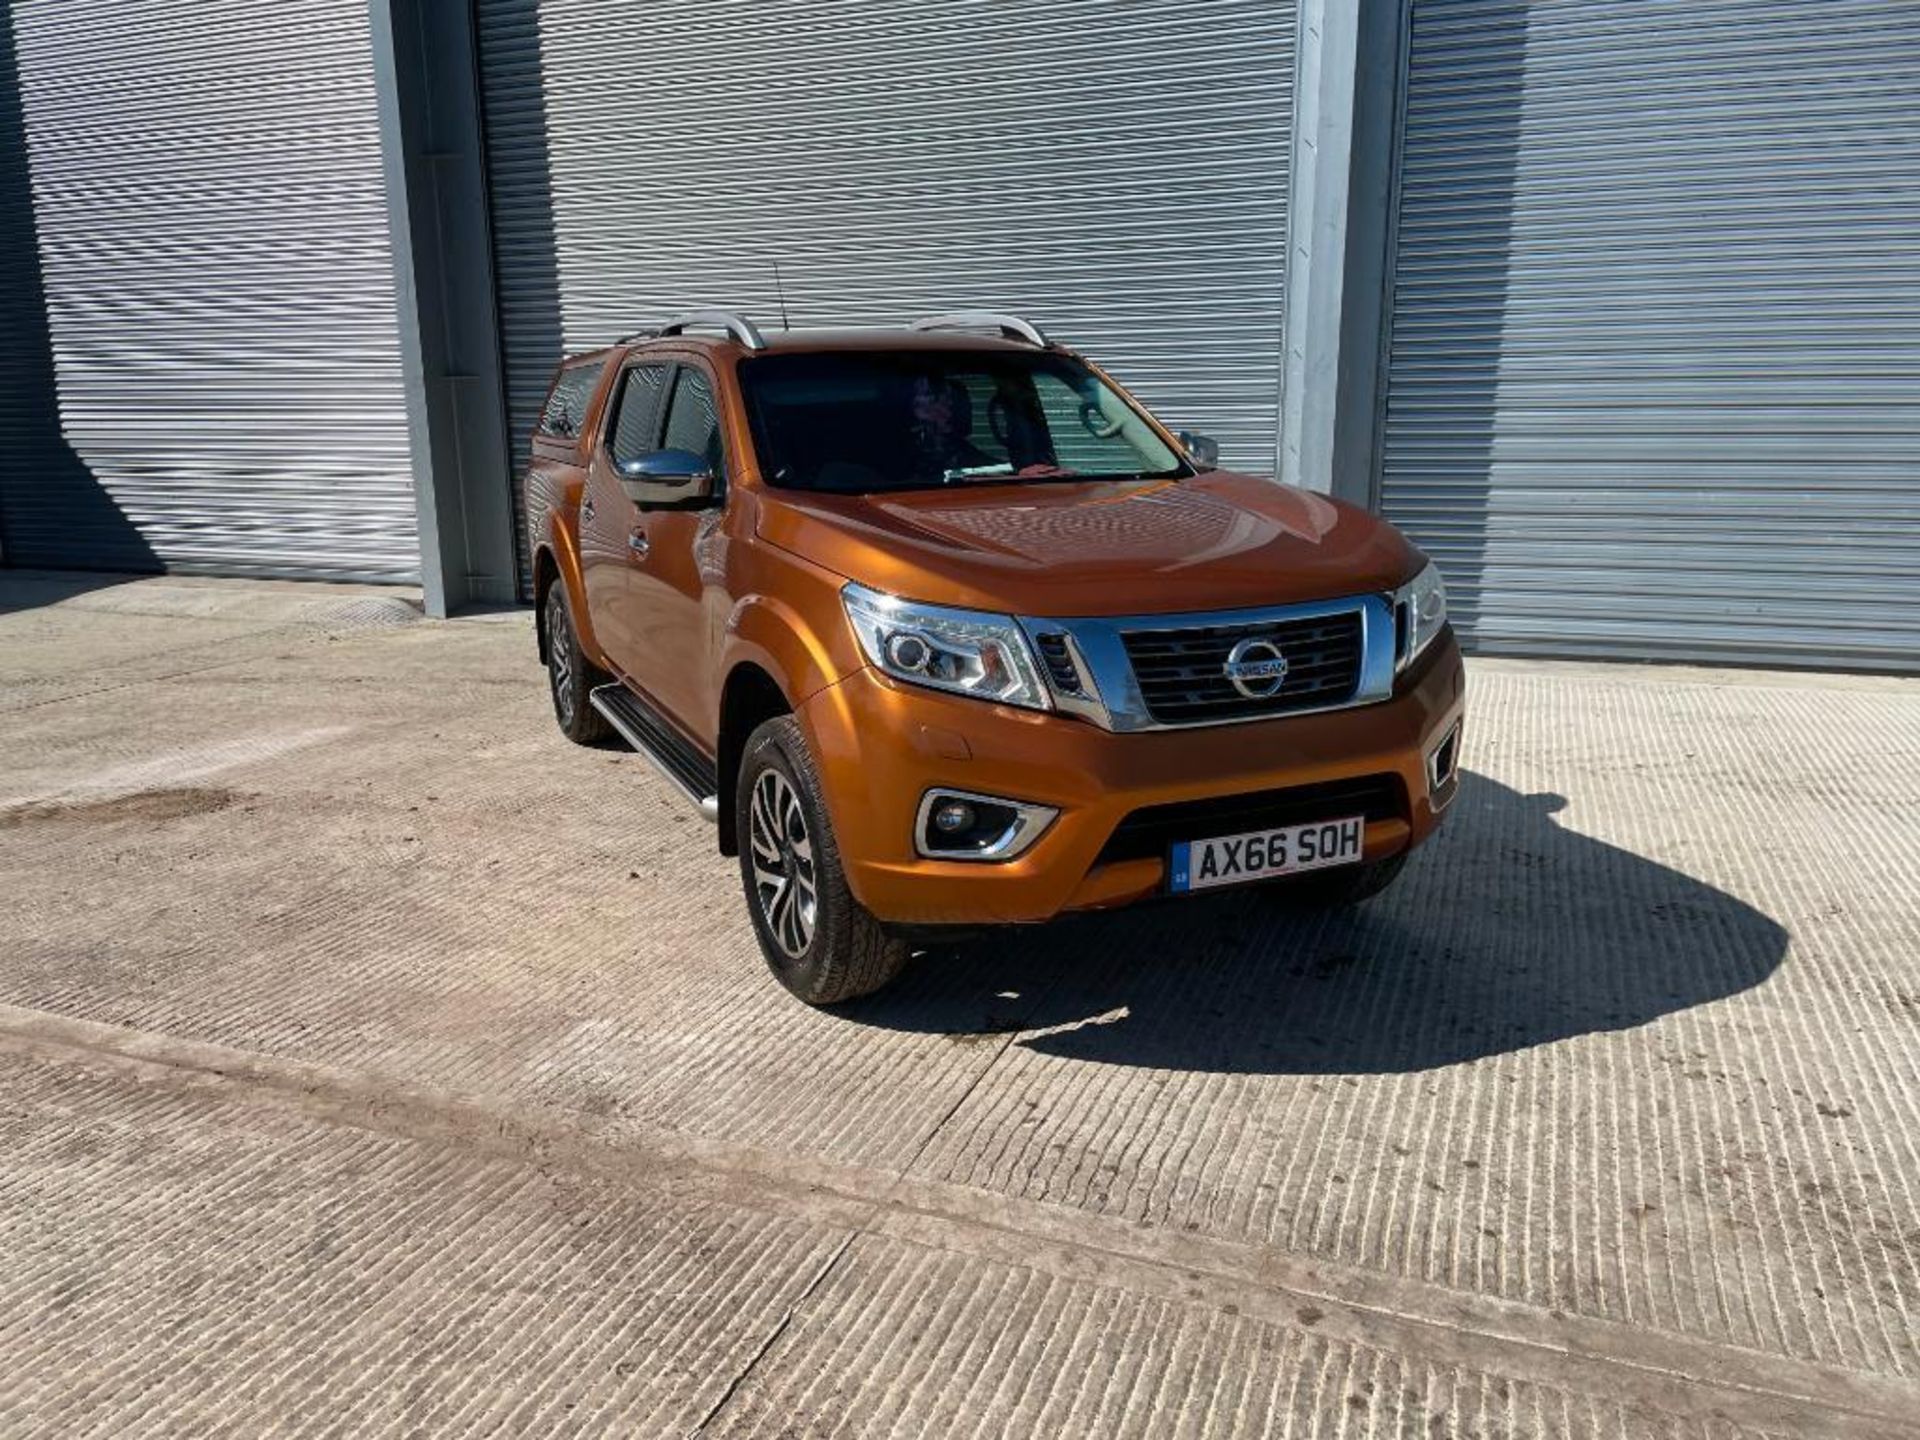 2016 Nissan Navara Techna 4wd pickup with Pegasus hard top, 4 door, diesel, automatic, leather uphol - Image 2 of 14